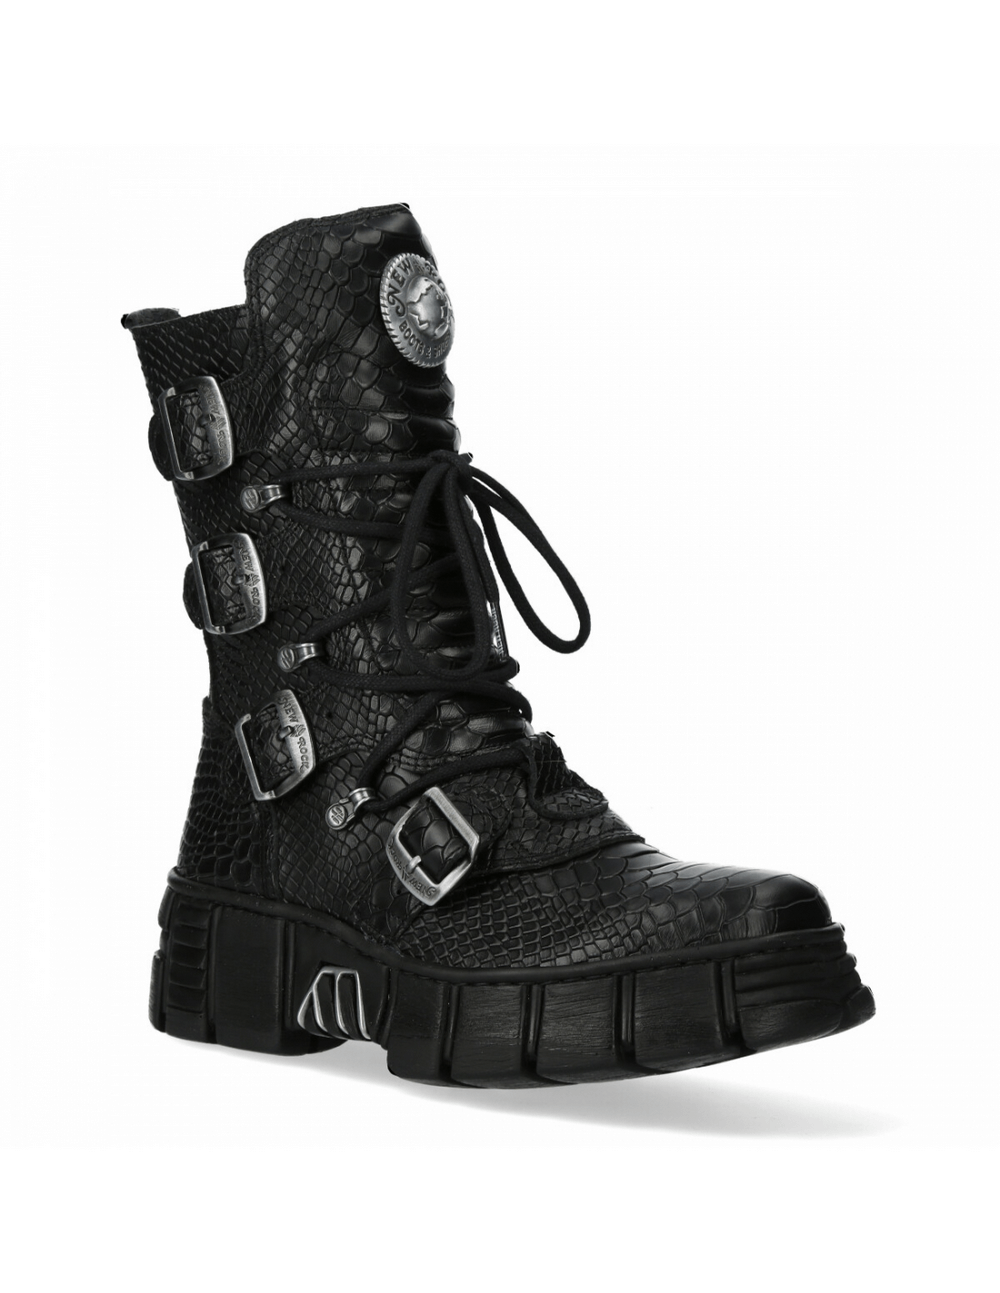 NEW ROCK Mid-Calf Boots with Gothic and Punk Elements